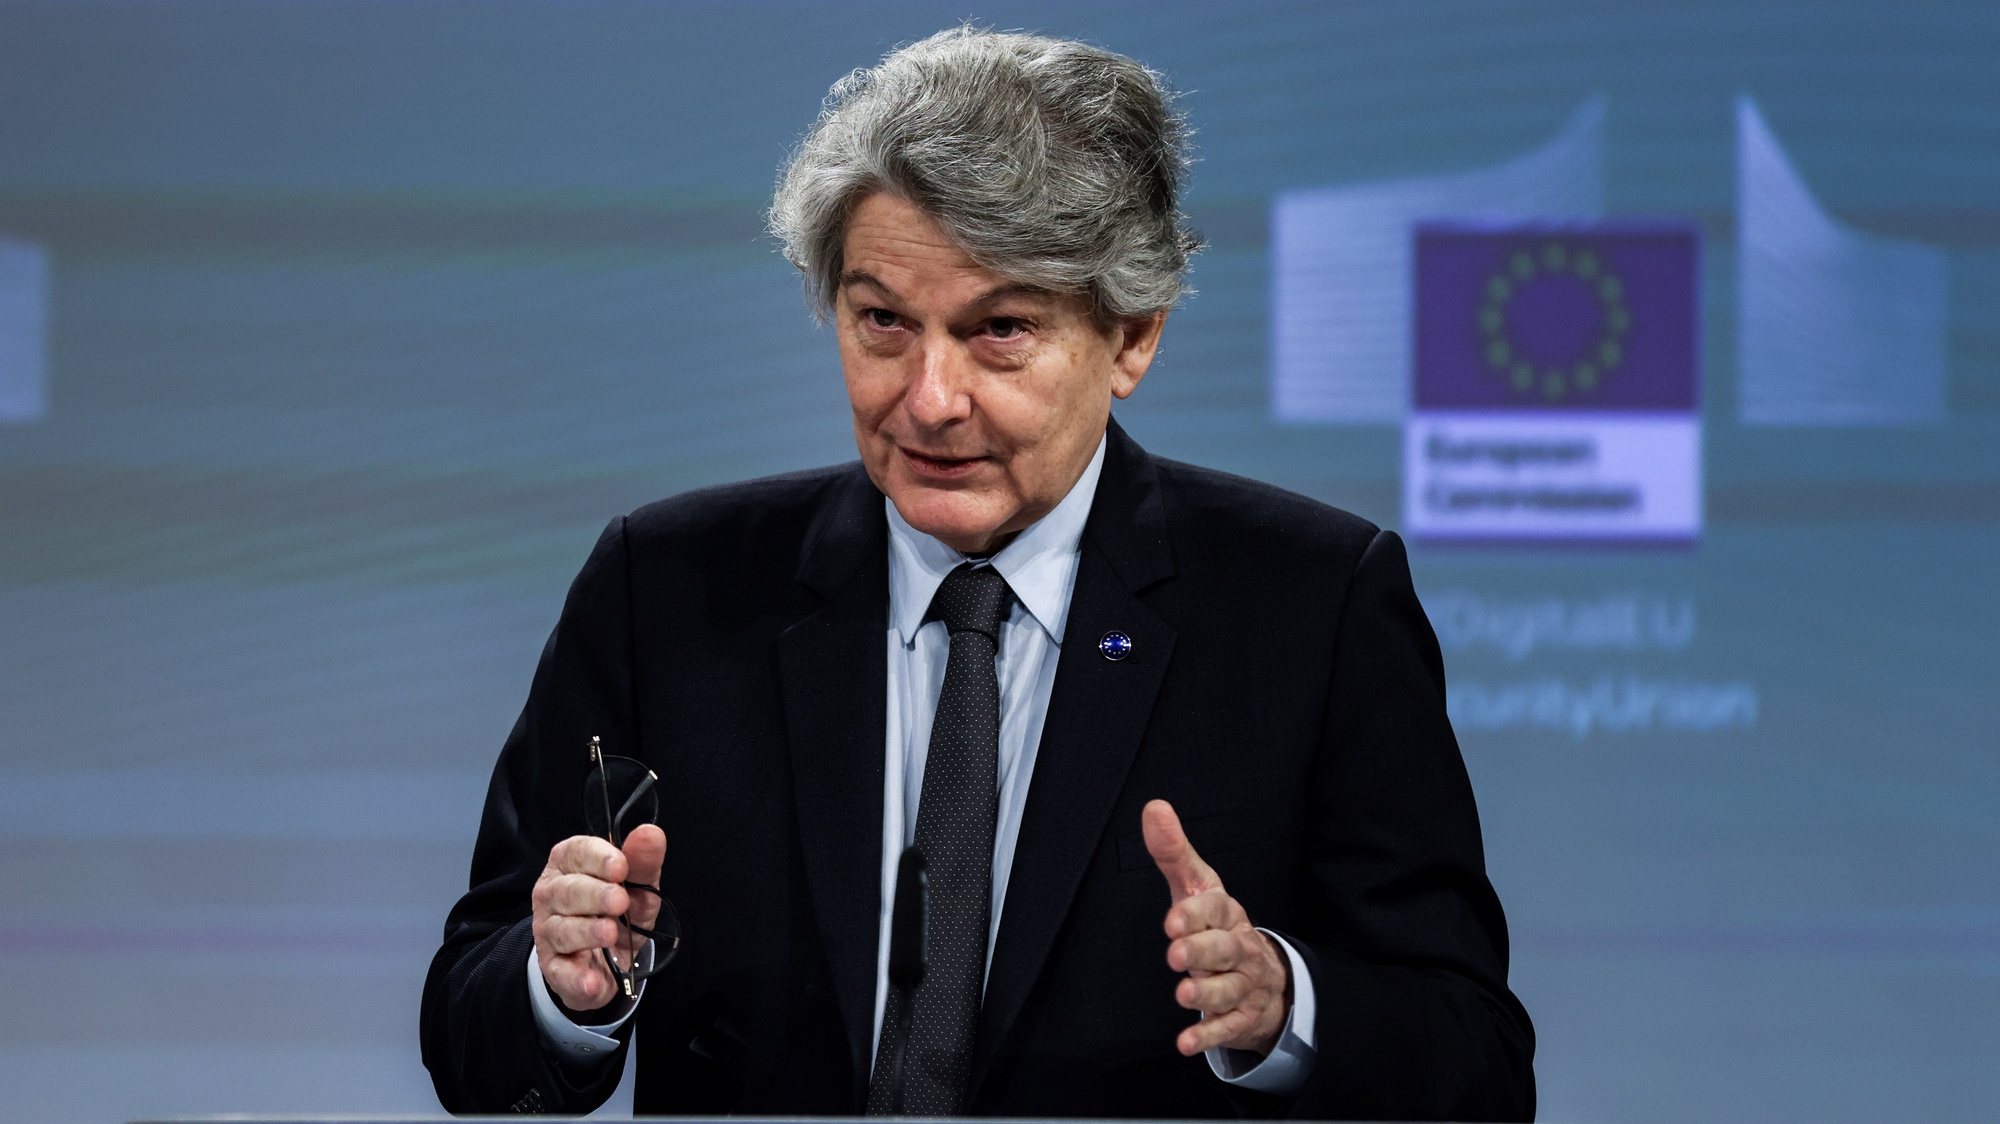 epa08887036 EU commissioner for internal market Thierry Breton gives a press conference on the cybersecurity strategy at EU headquarters in Brussels, Belgium, 16 December 2020.  EPA/KENZO TRIBOUILLARD / POOL